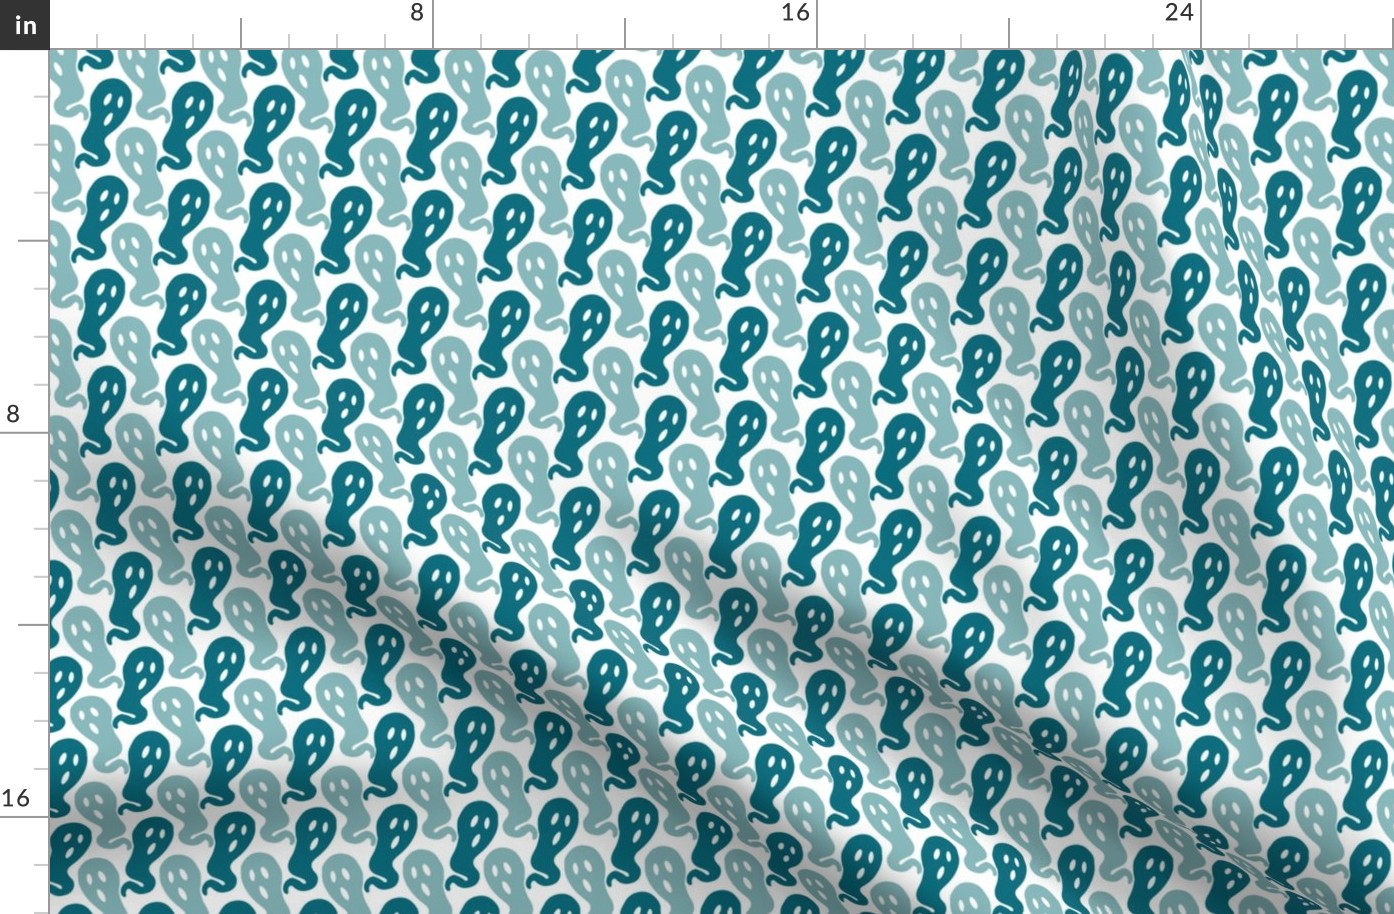 Small // Ghostly Haunts: Spooky Halloween Ghosts - Light Blue & Teal on Cream